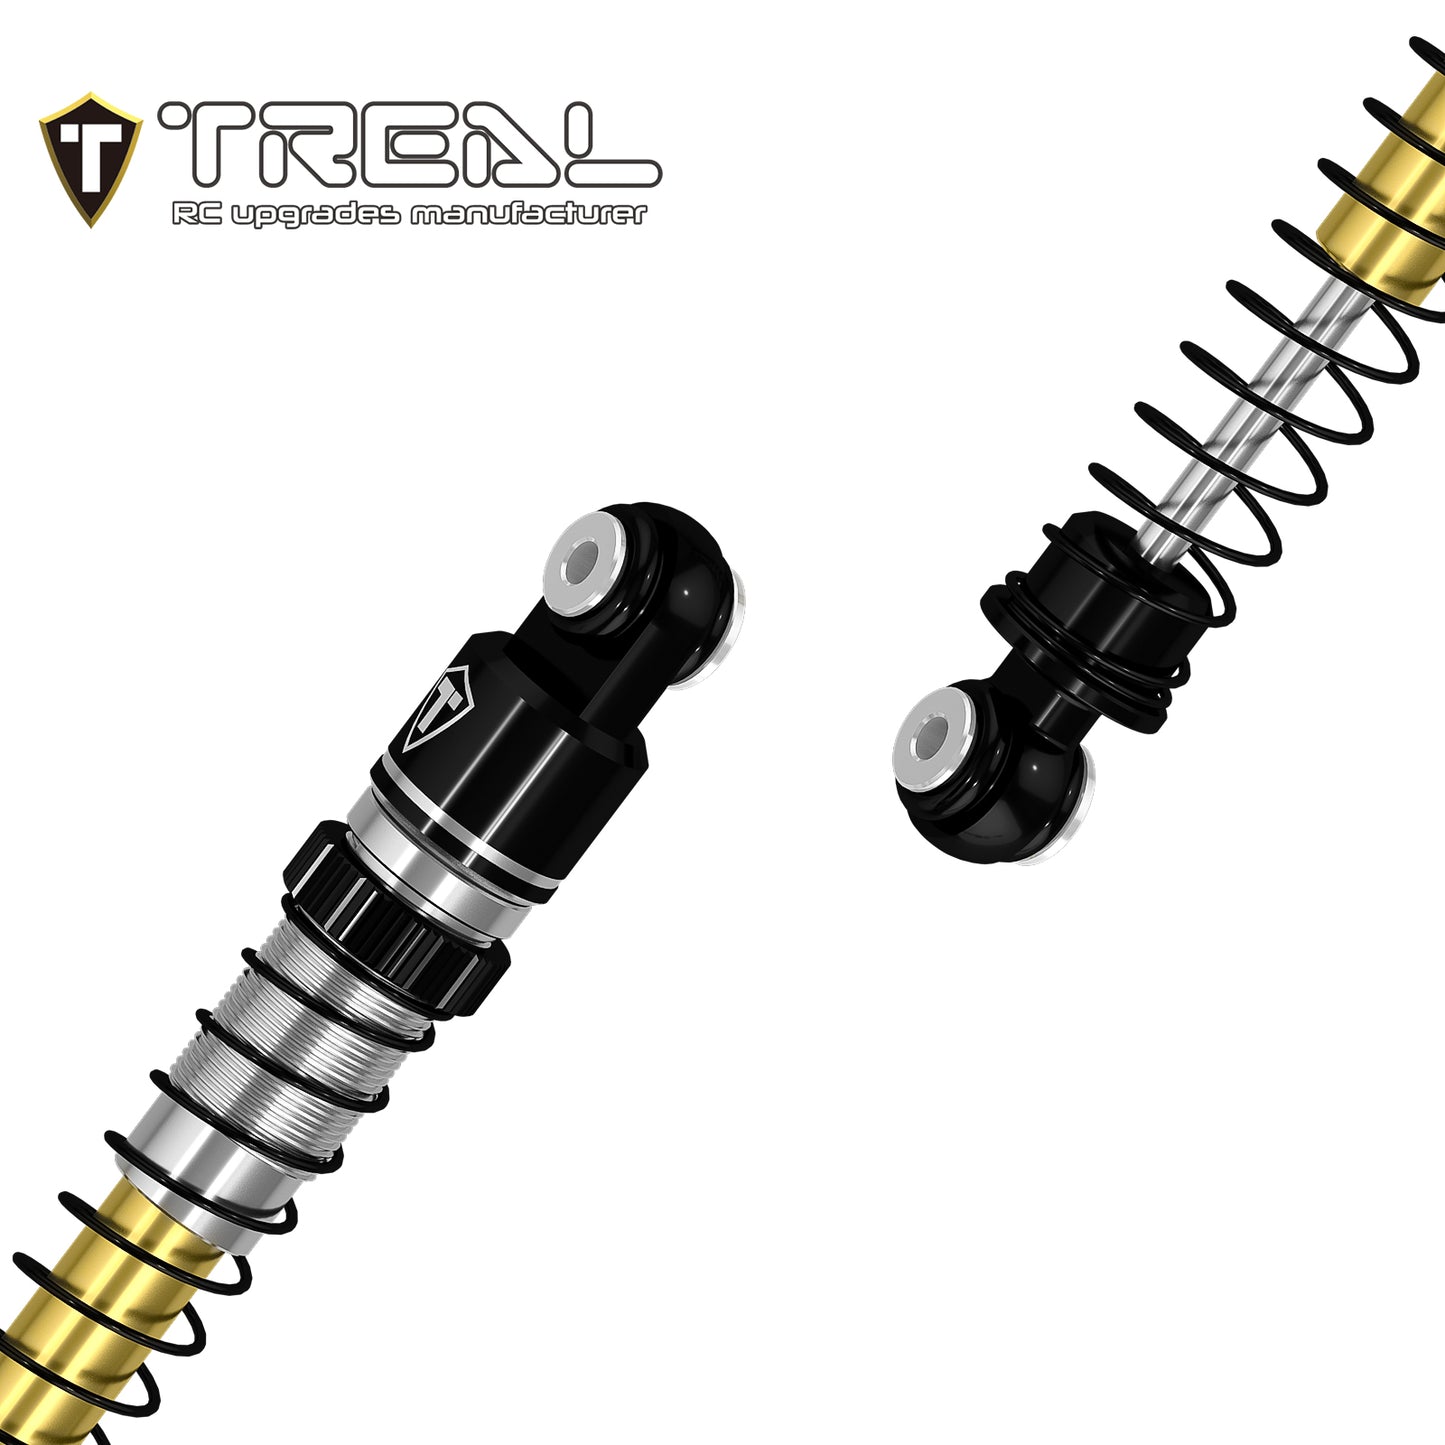 TREAL AX24 Shocks 53mm Aluminum Threaded Shock Adjustable Absorber Oil Damper compatible with 1/24 Axial AX24 XC-1 Upgrades